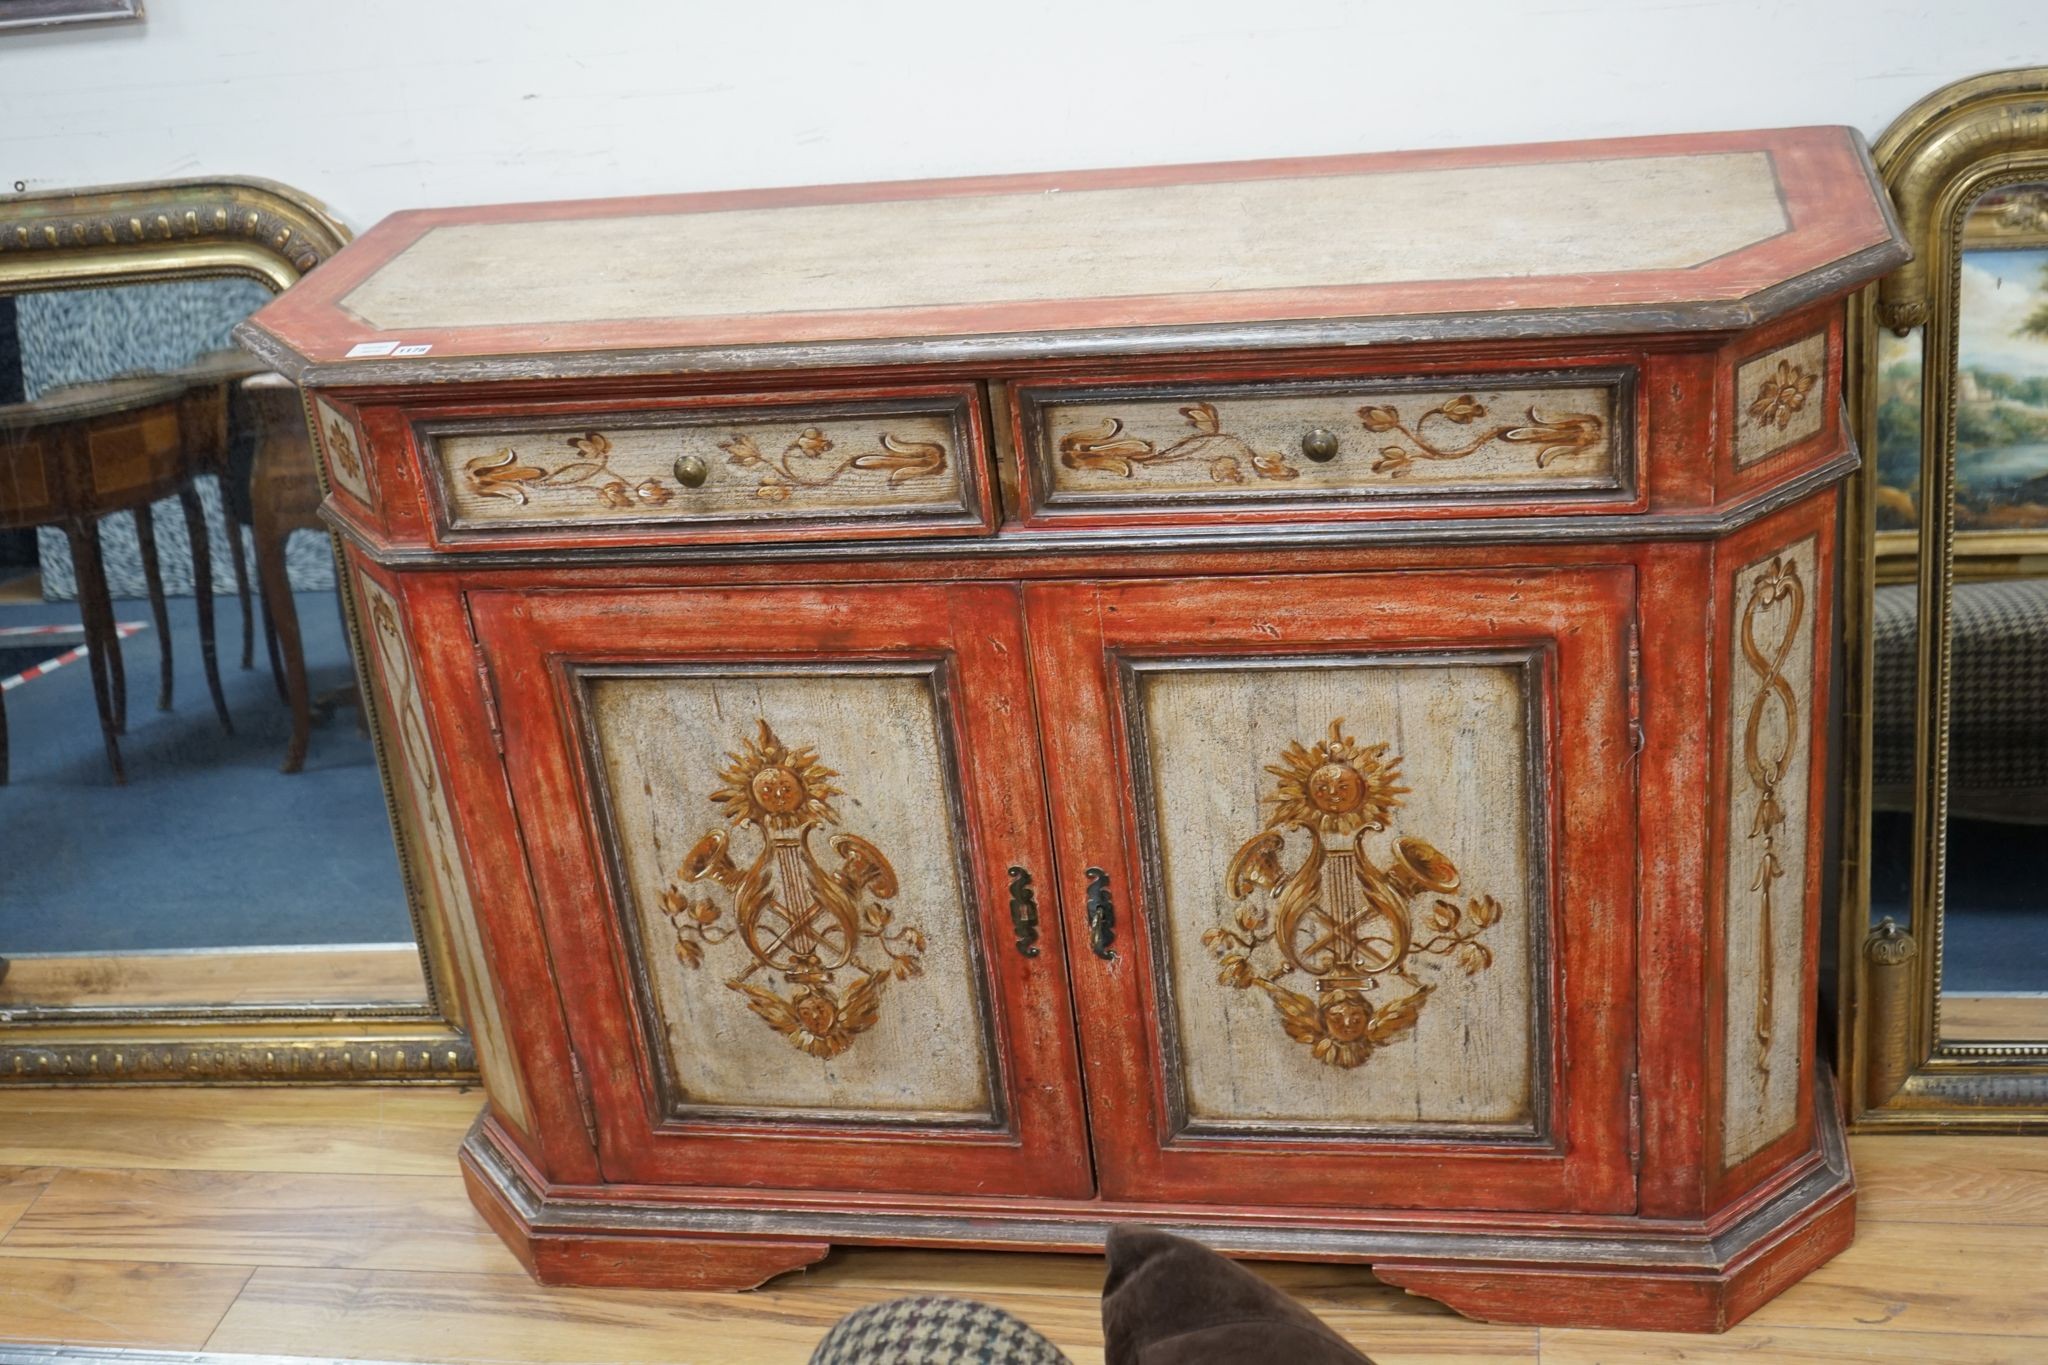 An 18th century French provincial style painted two door side cabinet, length 150cm, depth 49cm, height 105cm